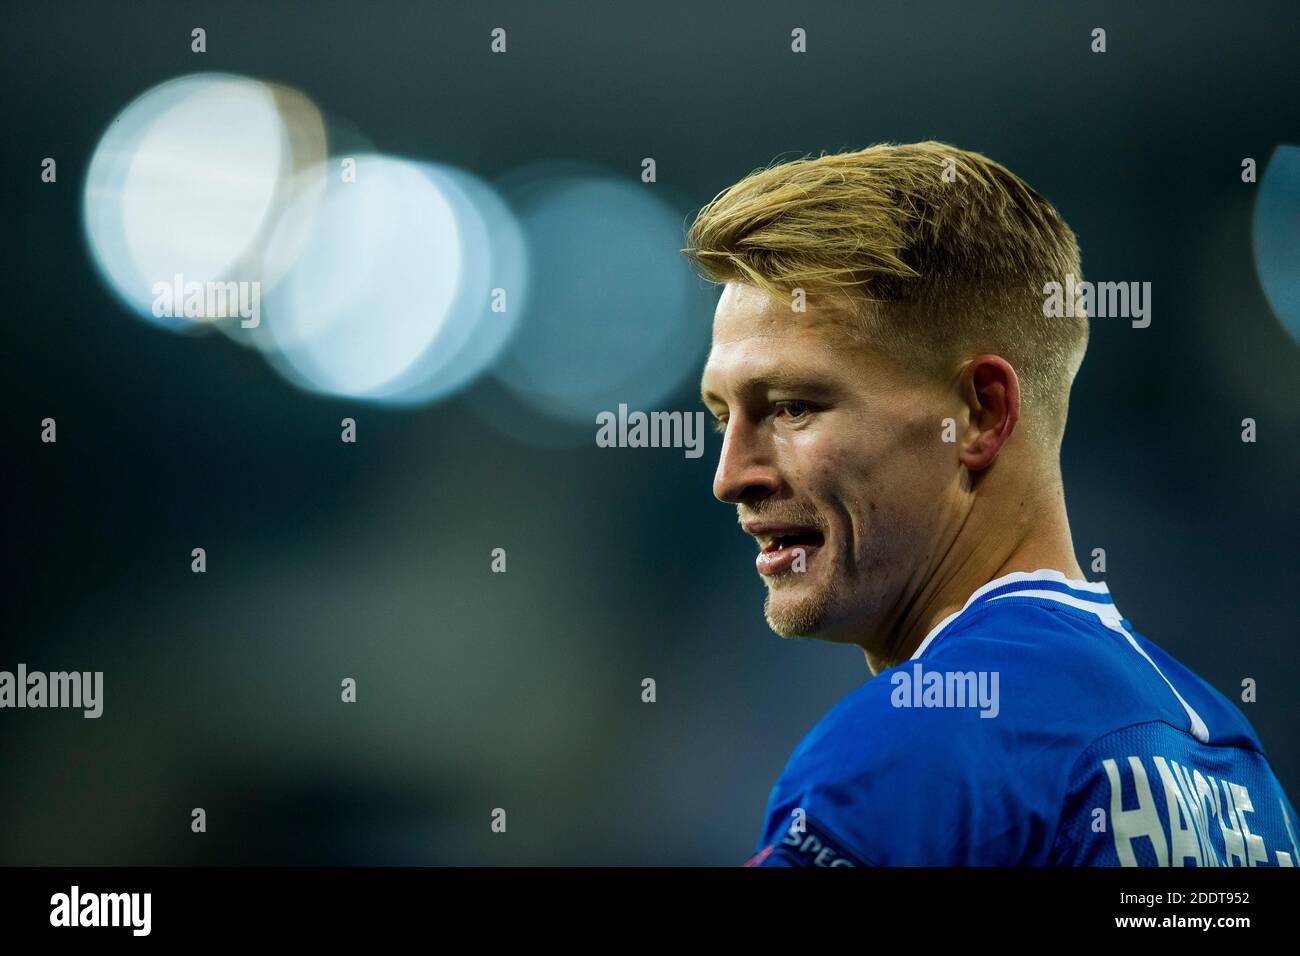 Gent's Andreas Hanche Olsen pictured during a soccer match between Belgian club KAA Gent and Serbian team Crvena Zvezda (Red Star Belgrade), Thursday Stock Photo